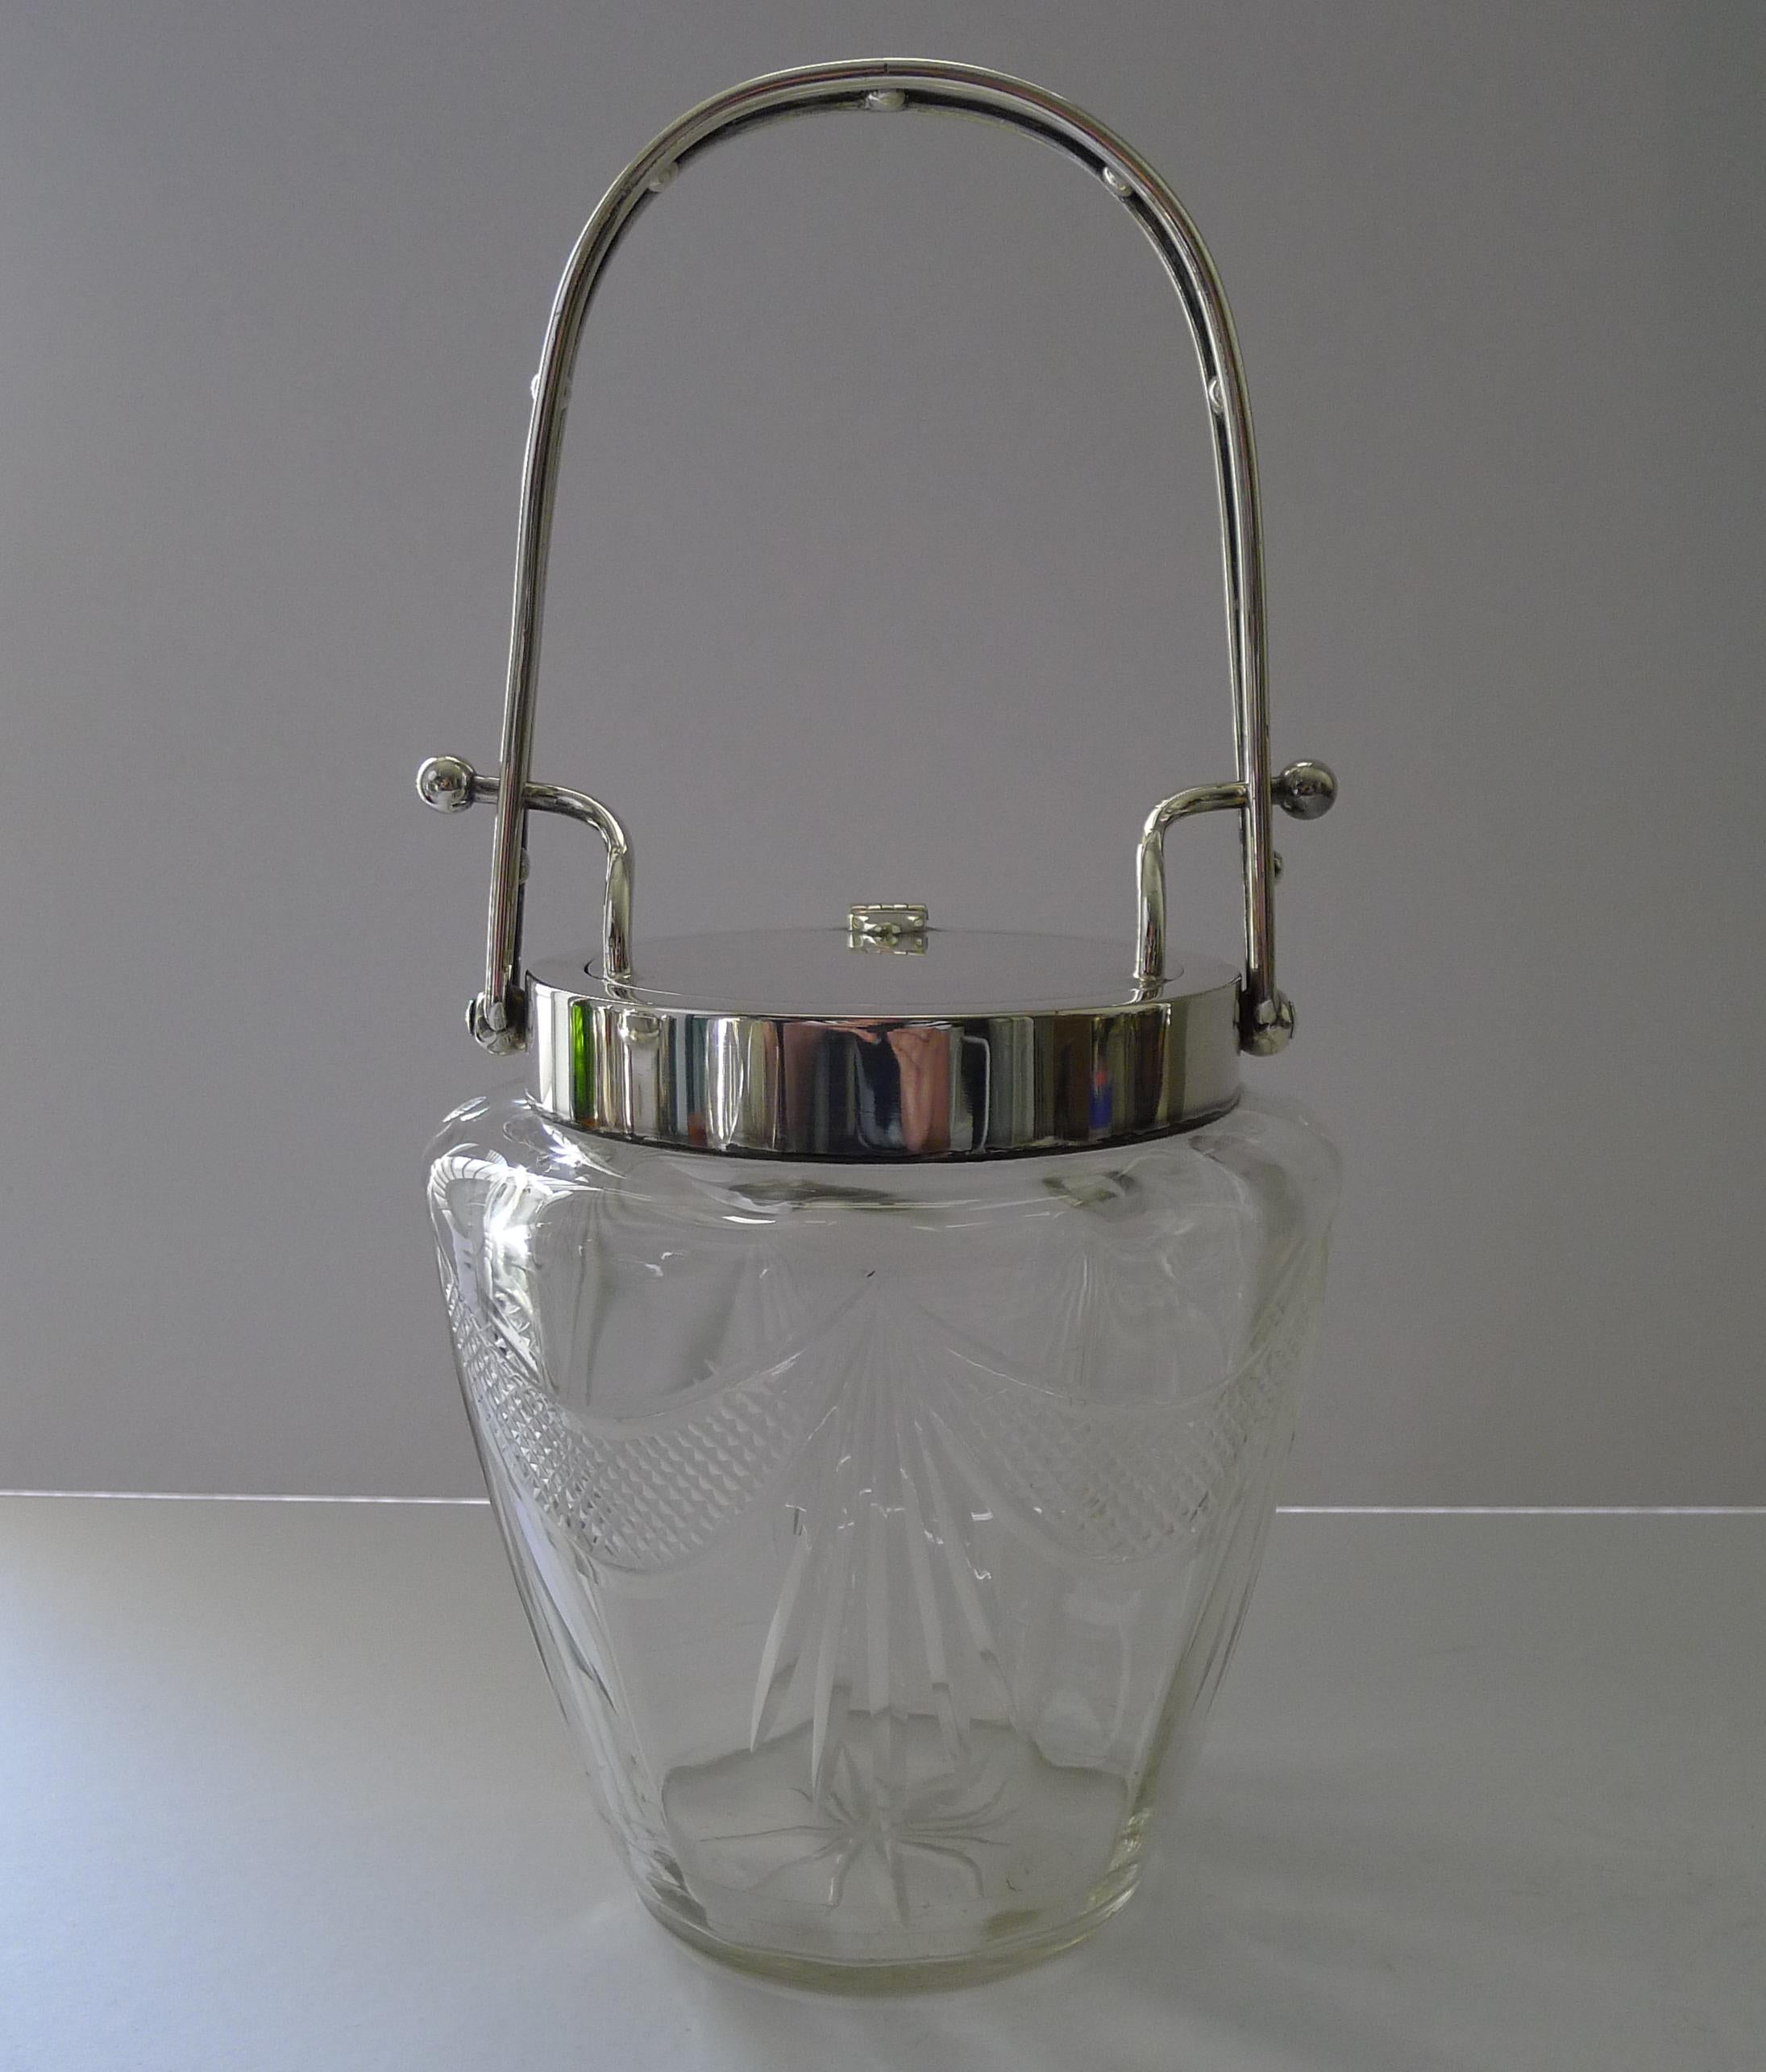 A beautiful example of an English Edwardian biscuit box or barrel, made from hand-cut glass and silver plated fittings.

The tall handle moved downwards opens the hinged lid, the underside marked 